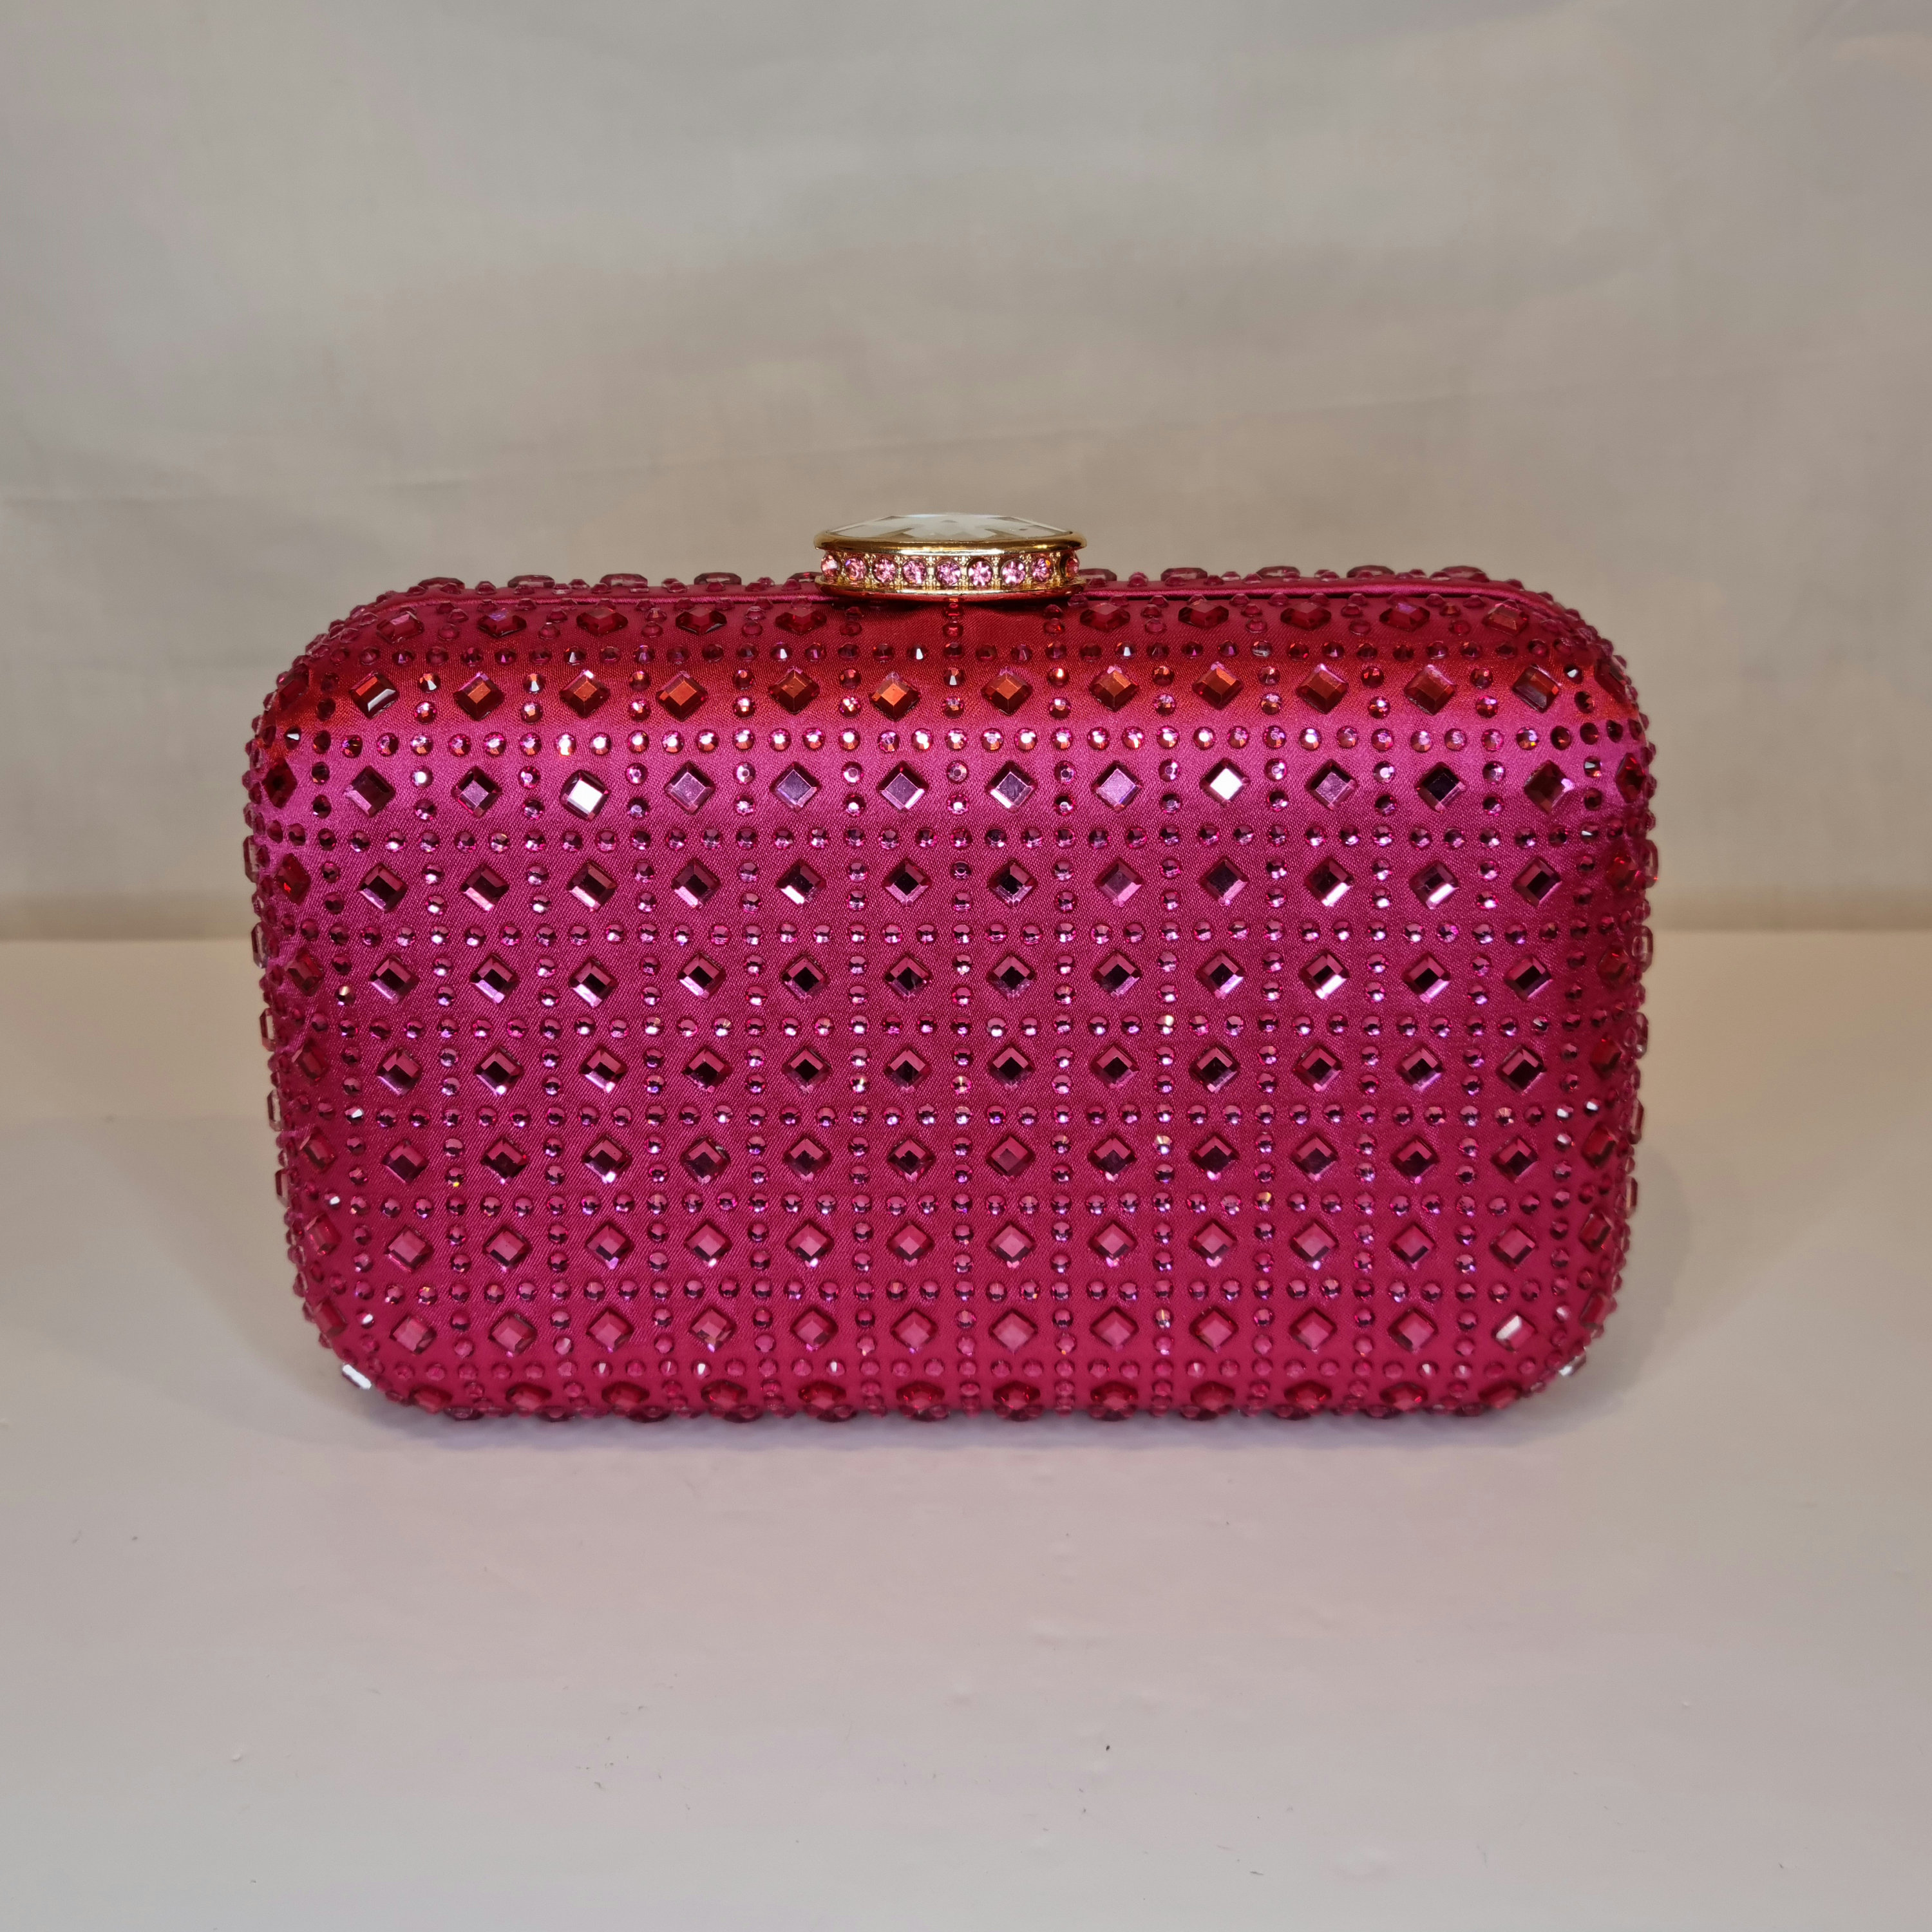 Dusty Pink Suede Invitation Clutch Envelope Bag with Large Crystal Brooch Embellishment